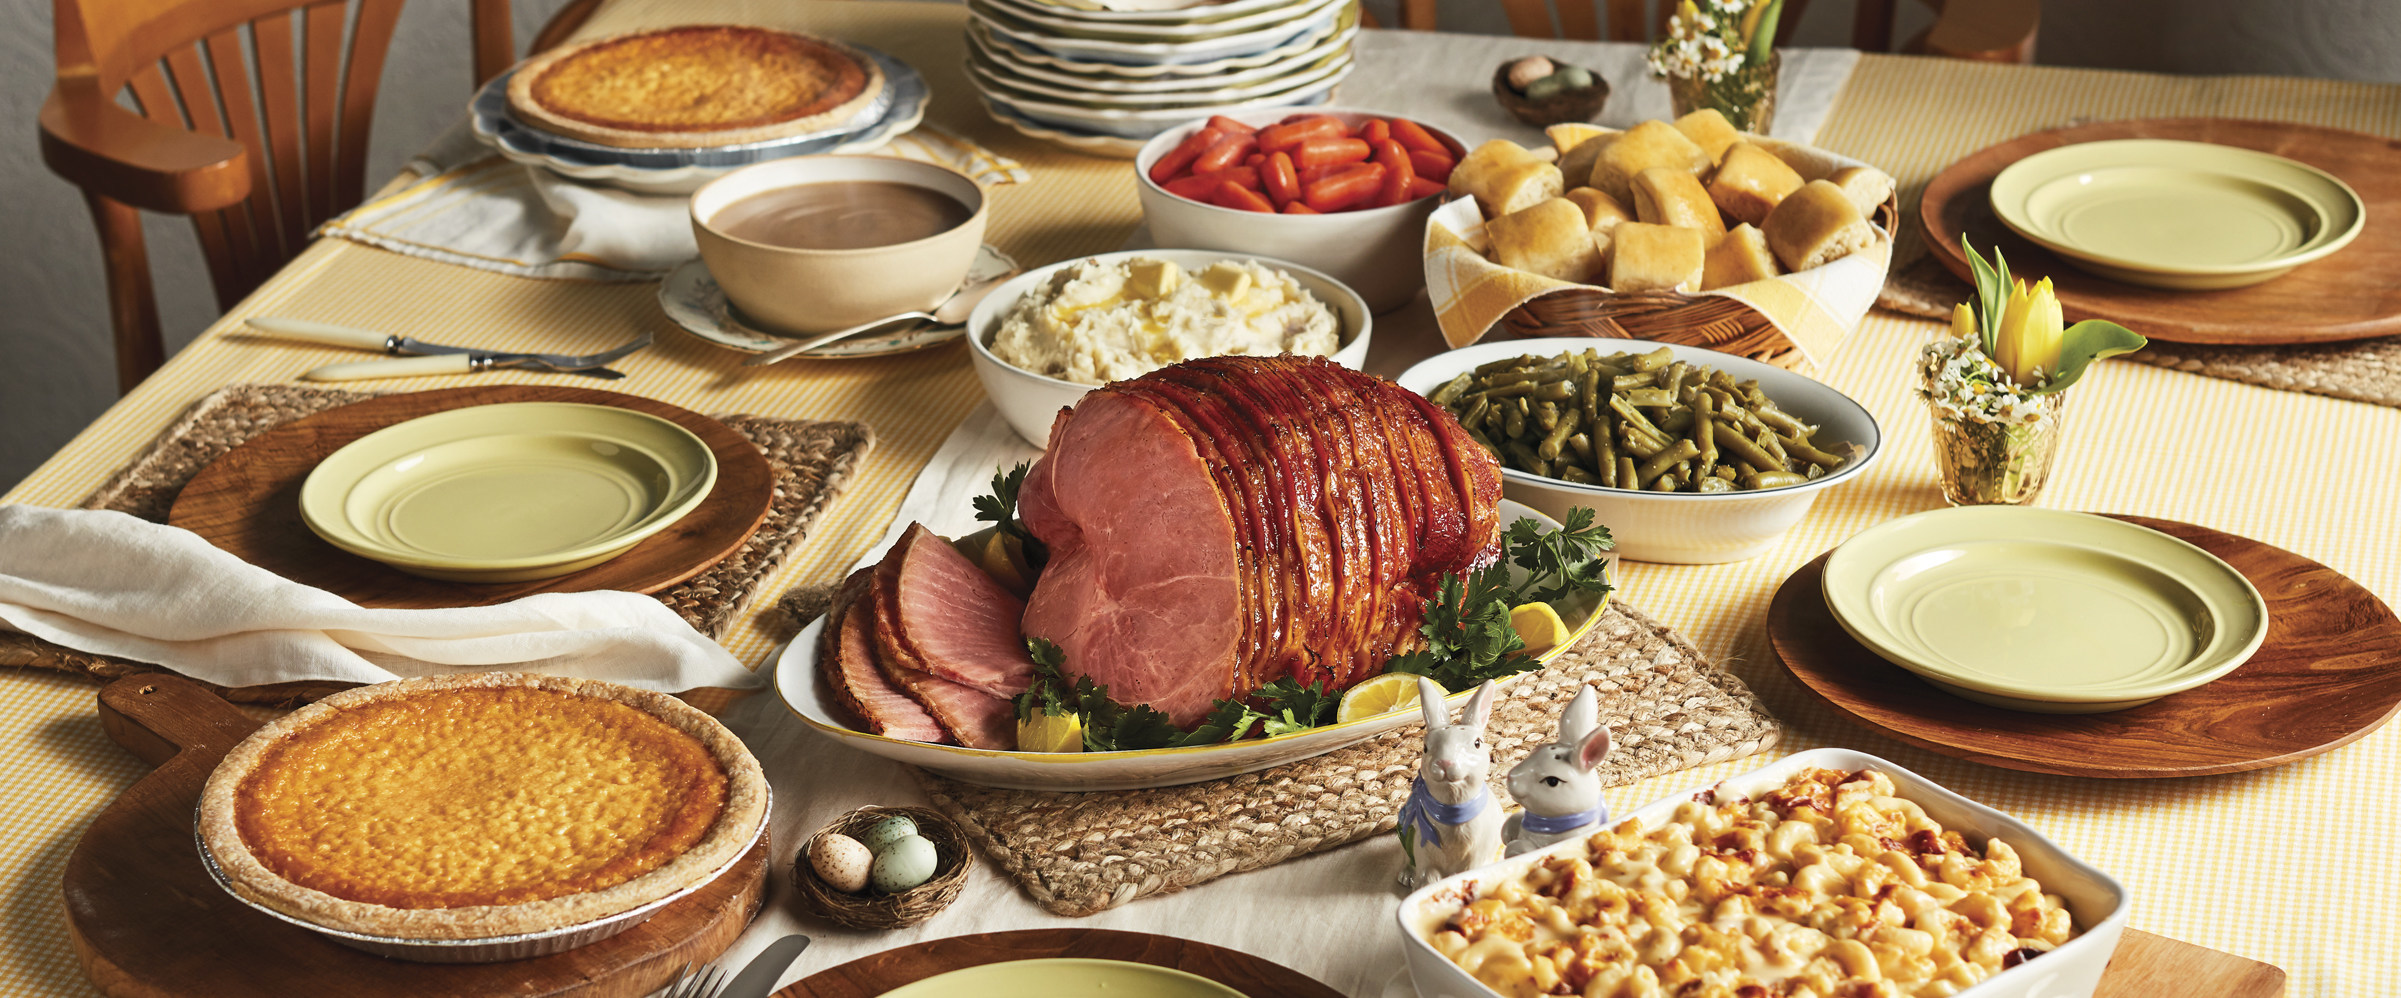 Cracker Barrel Christmas Meal / Where To Get A Holiday Meal Or Christmas Dinner To Go Order In ...